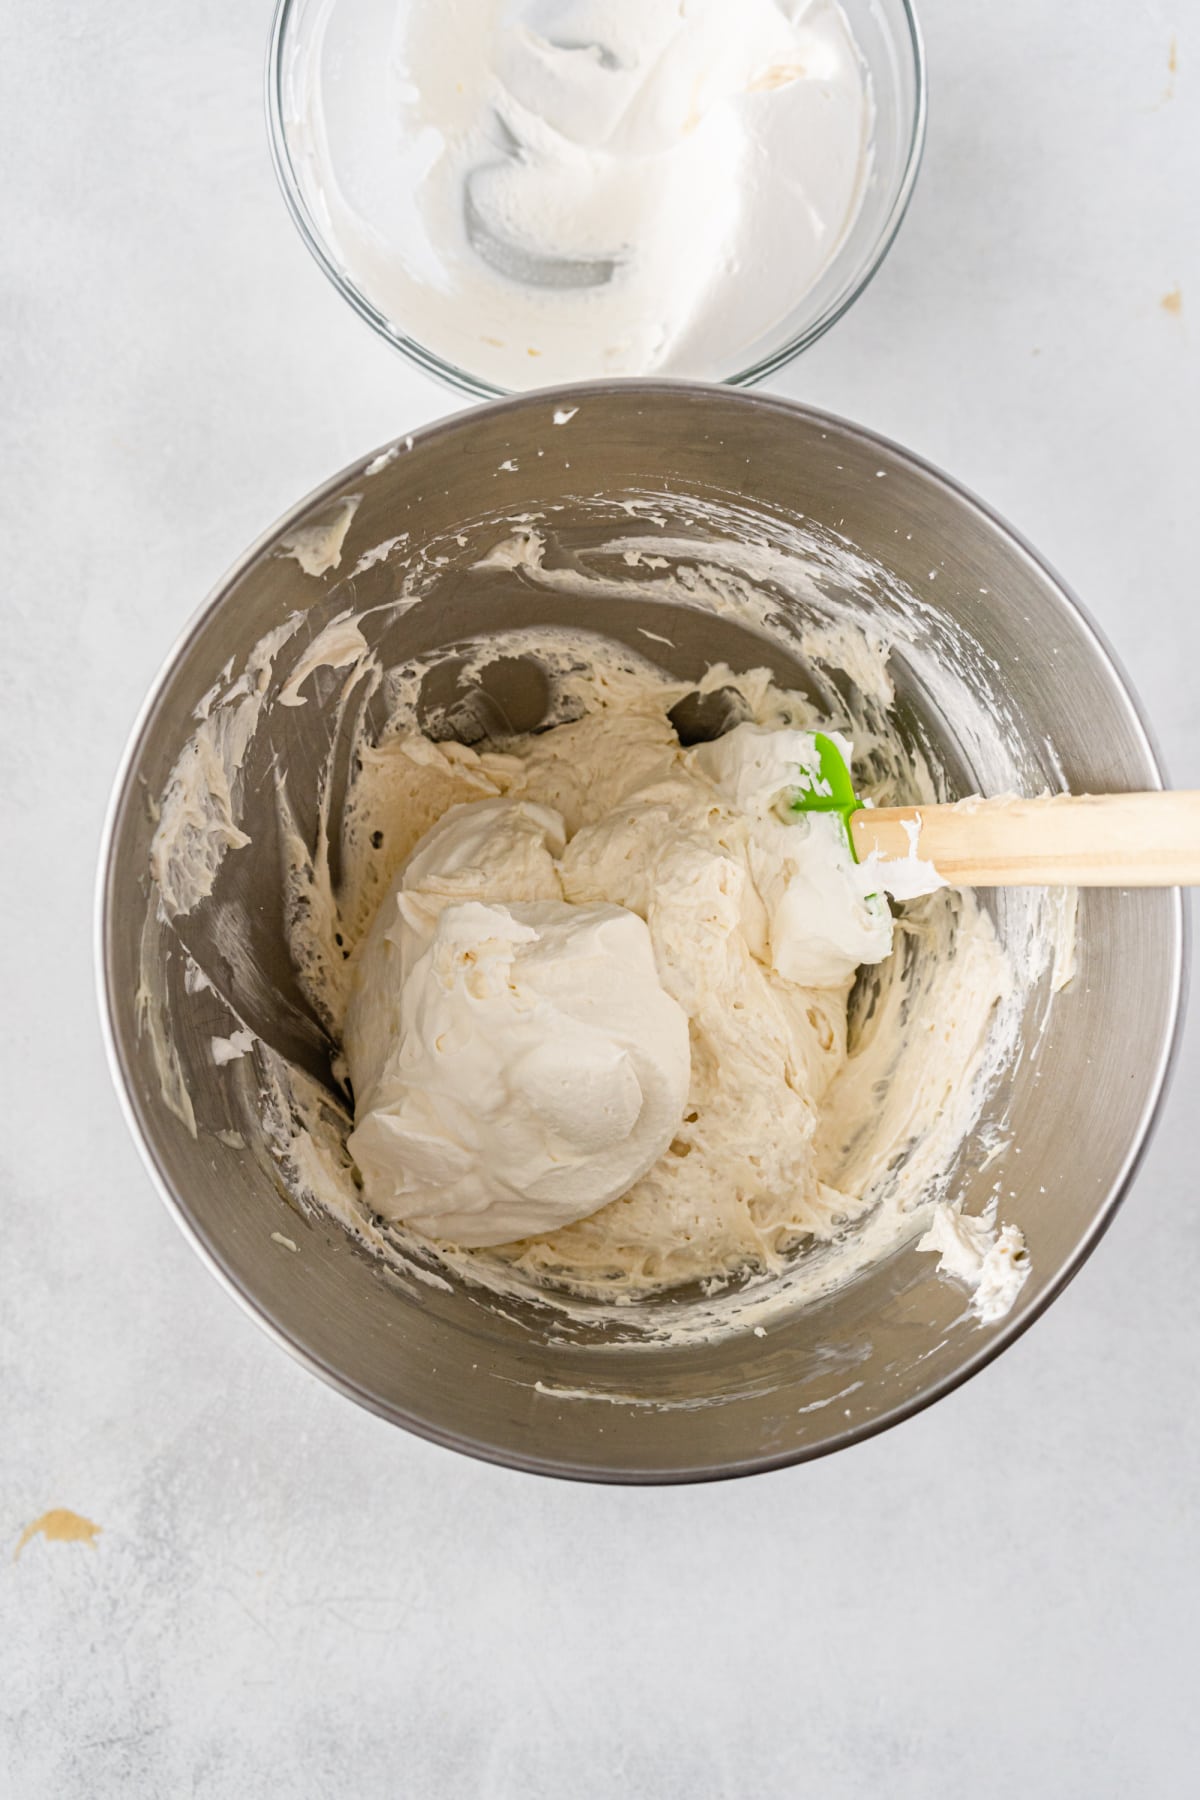 Folding cool whip into cream cheese mixture